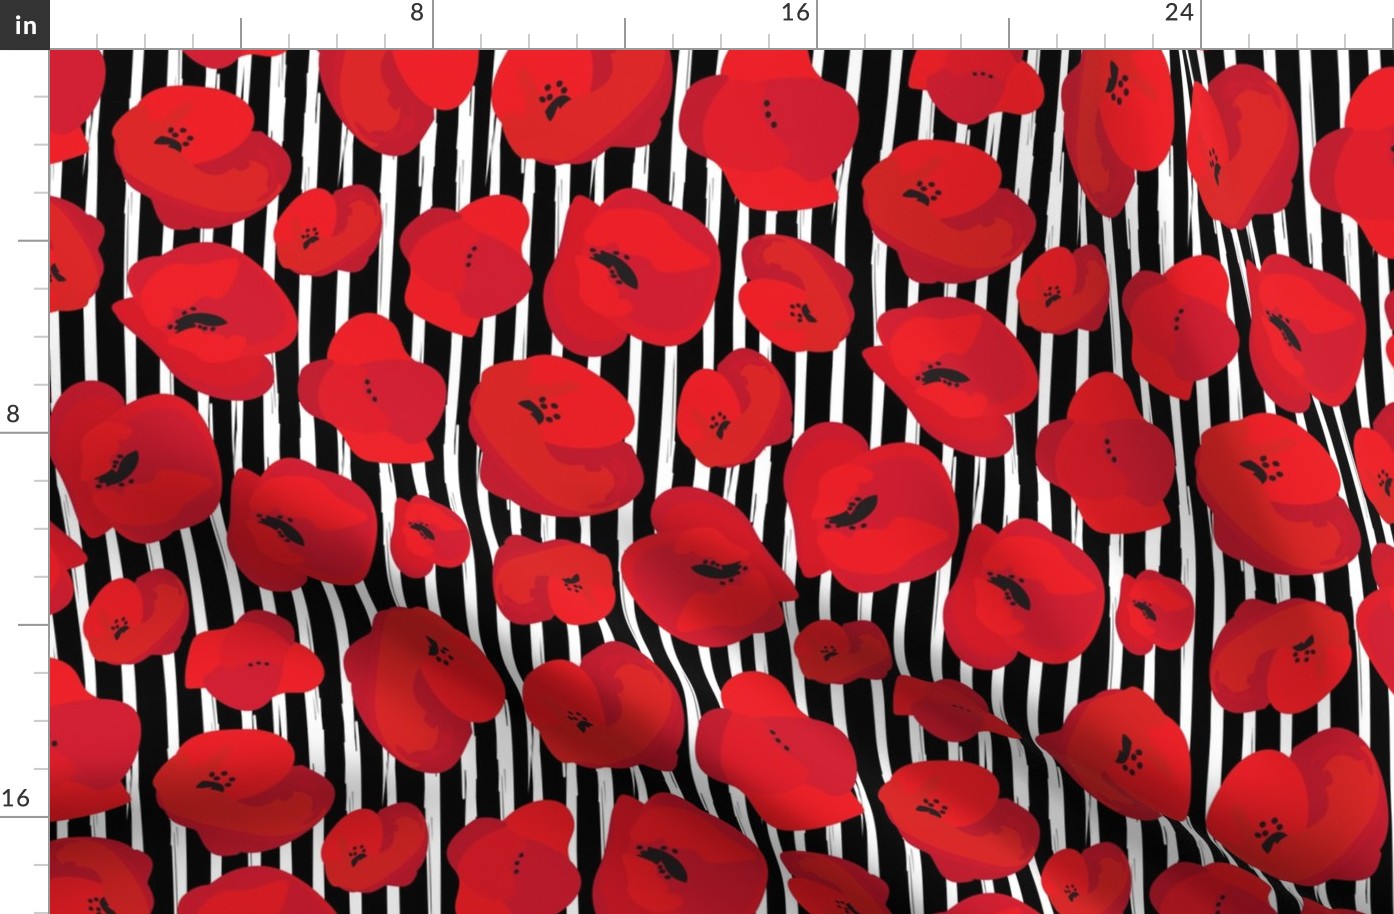 *Metallic* Falling Poppies on Black and White Vertical Stripes - Large Scale - Optimized for Metallic Wallpaper